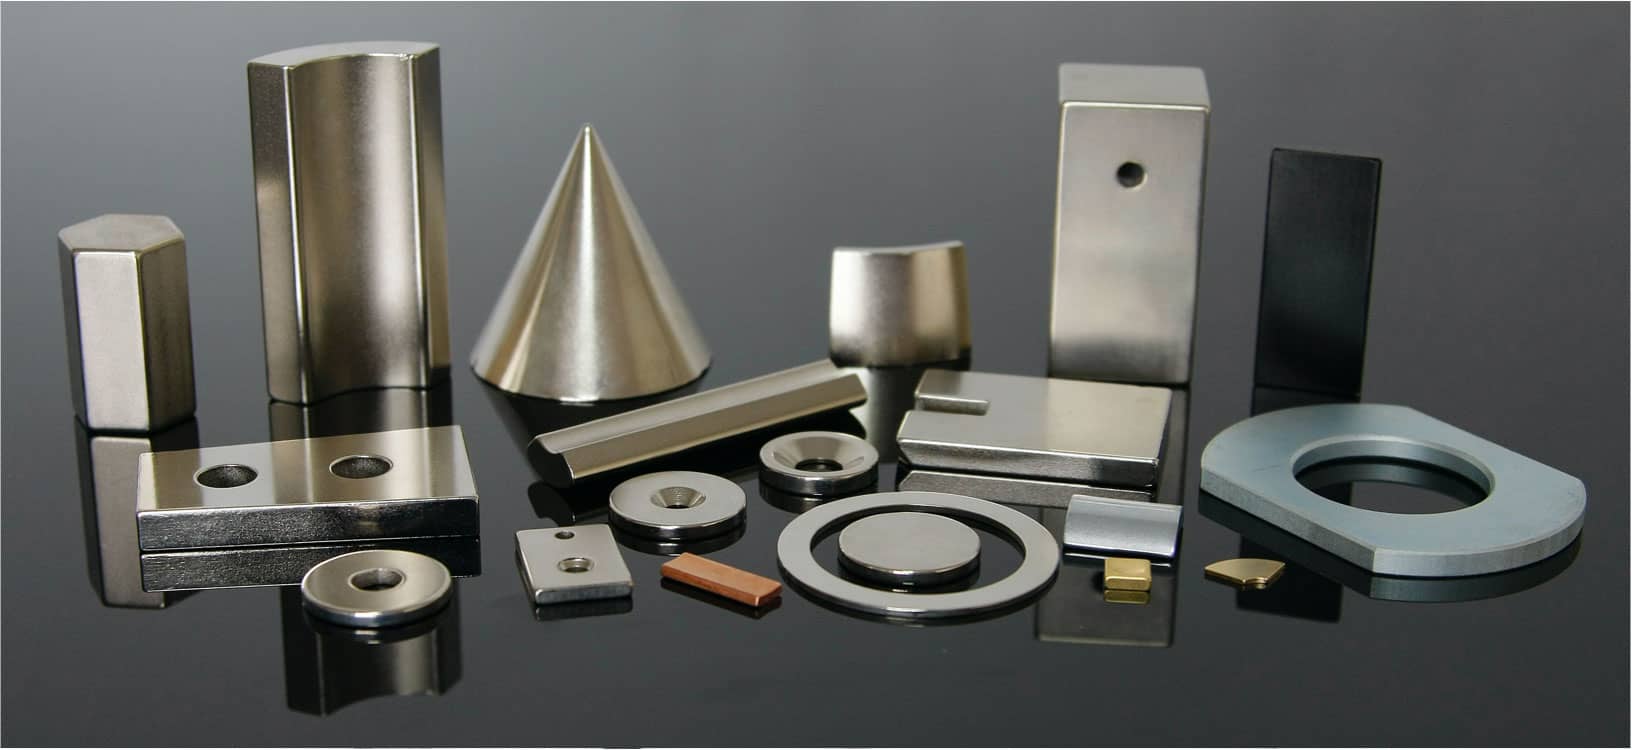 Typical forms and sizes of Neodymium magnets